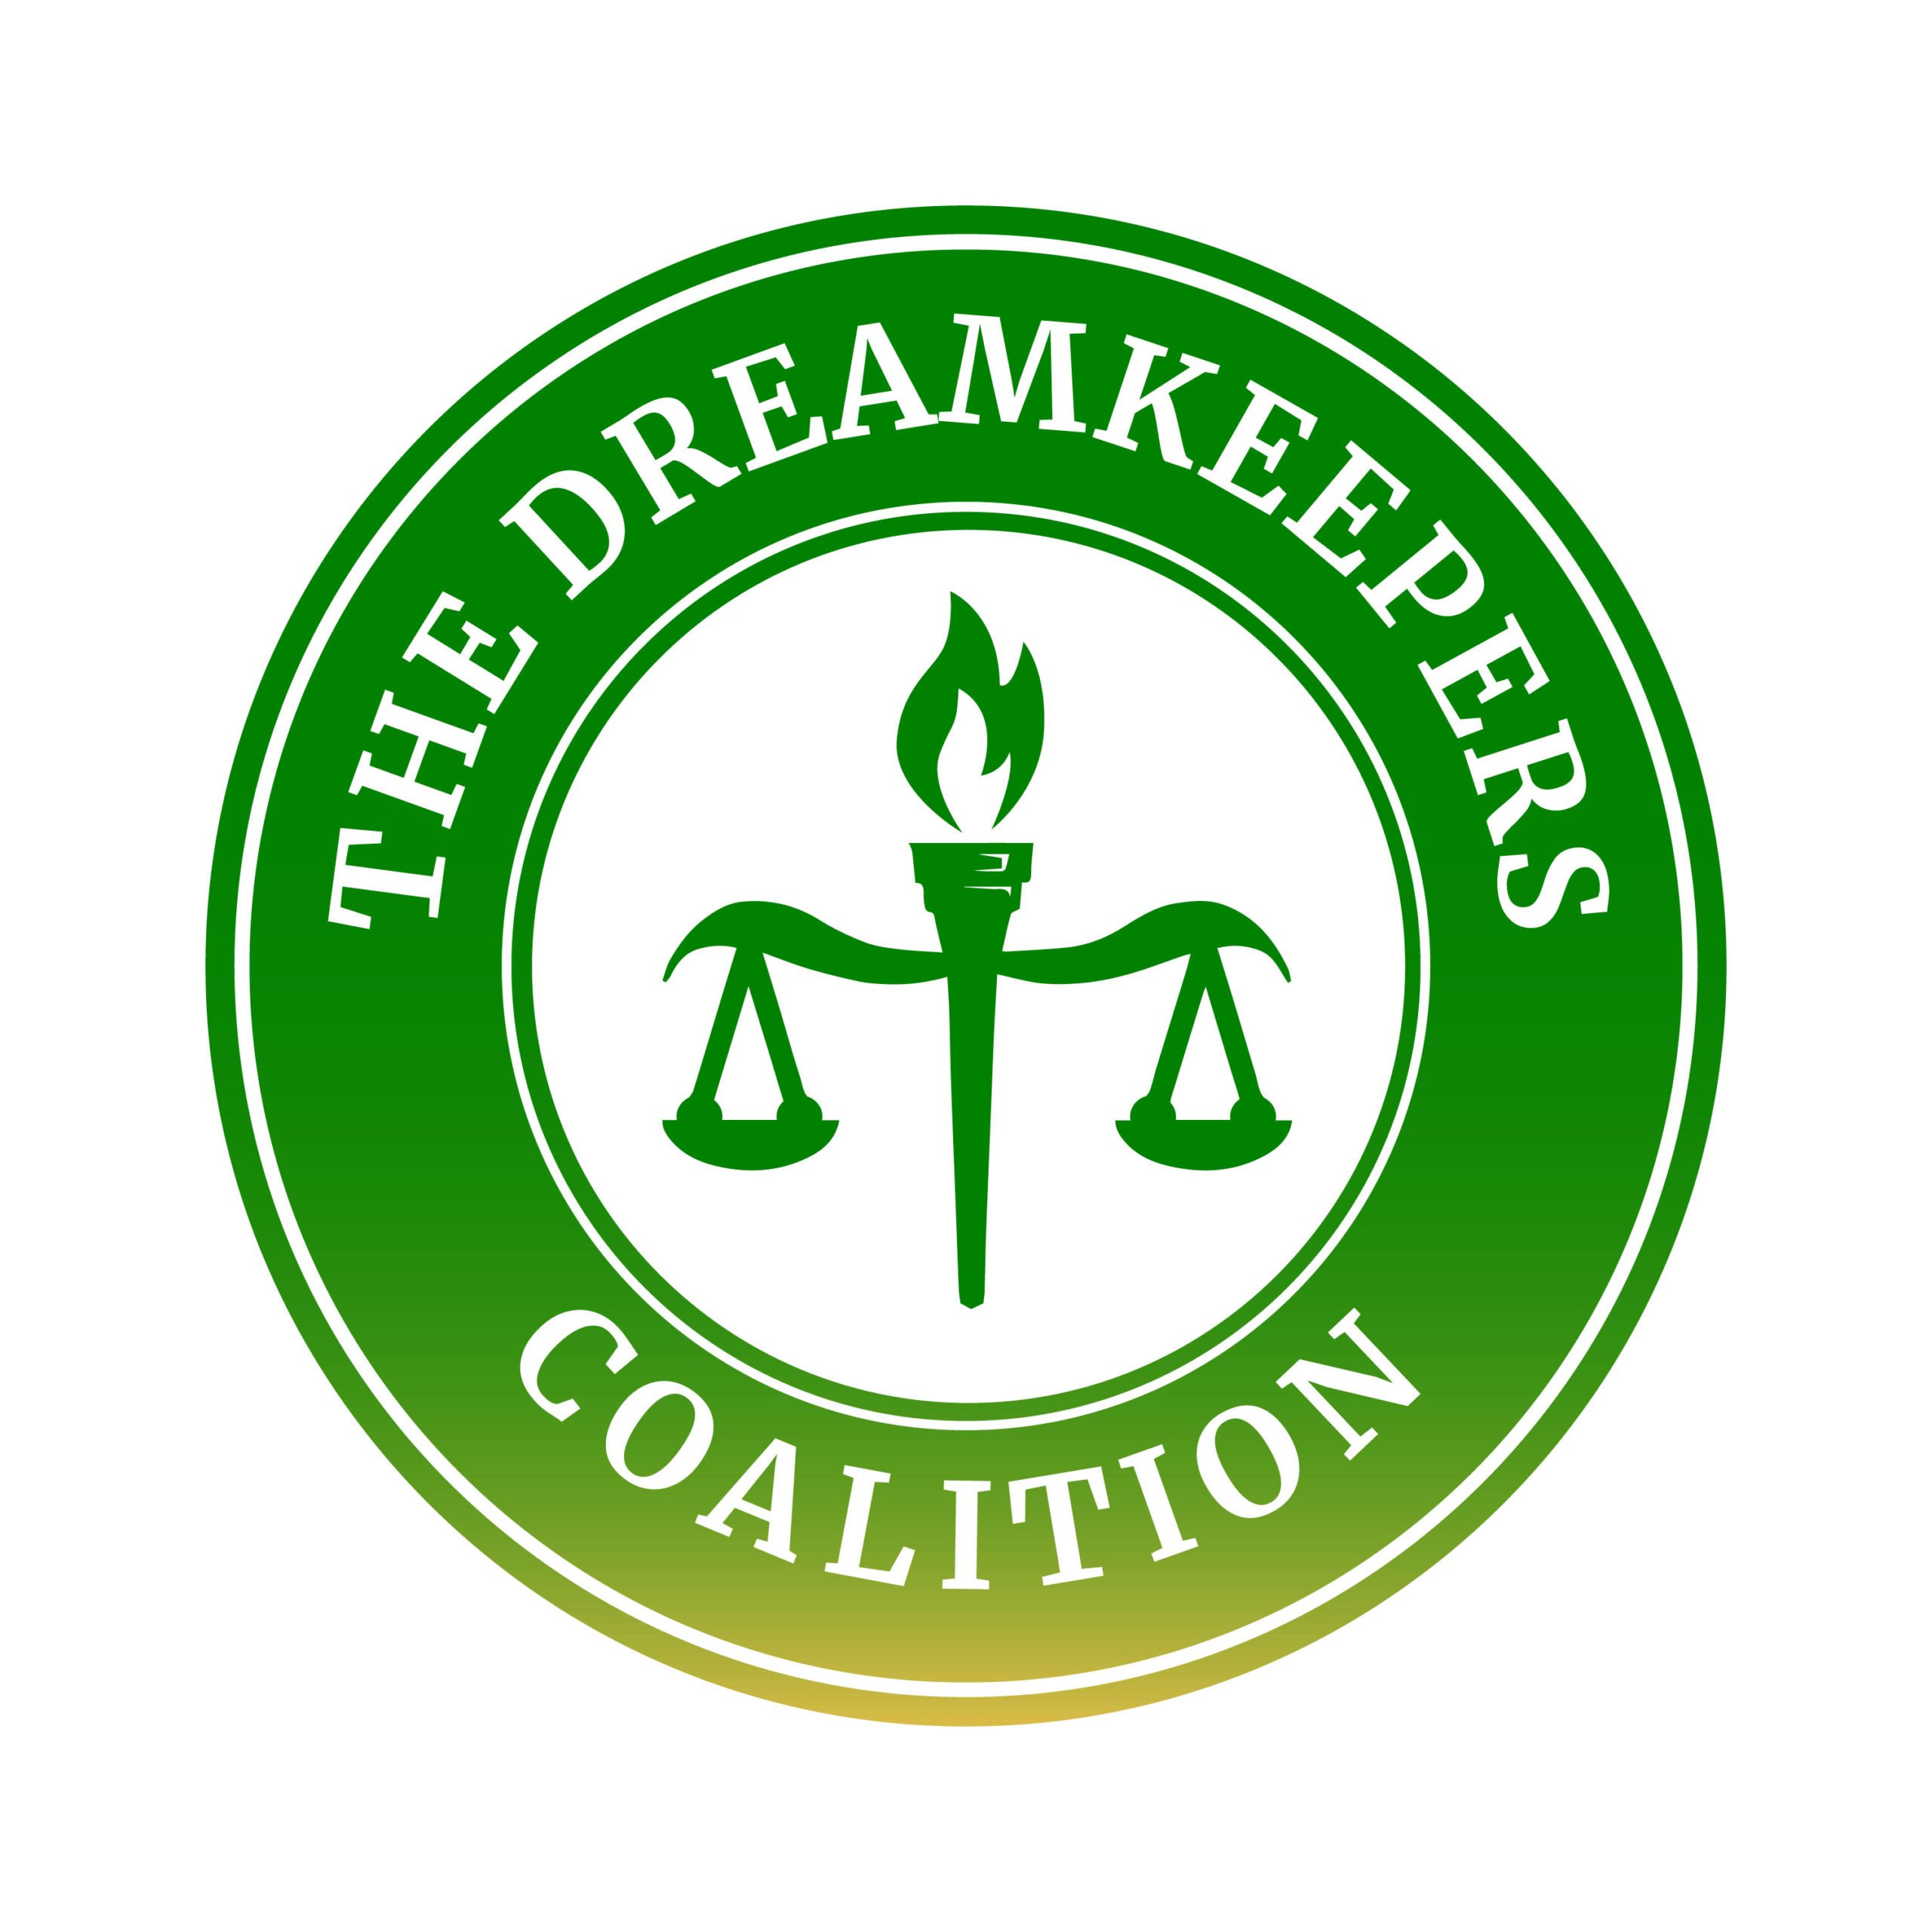 The Dreamkeepers Coalition, Inc.